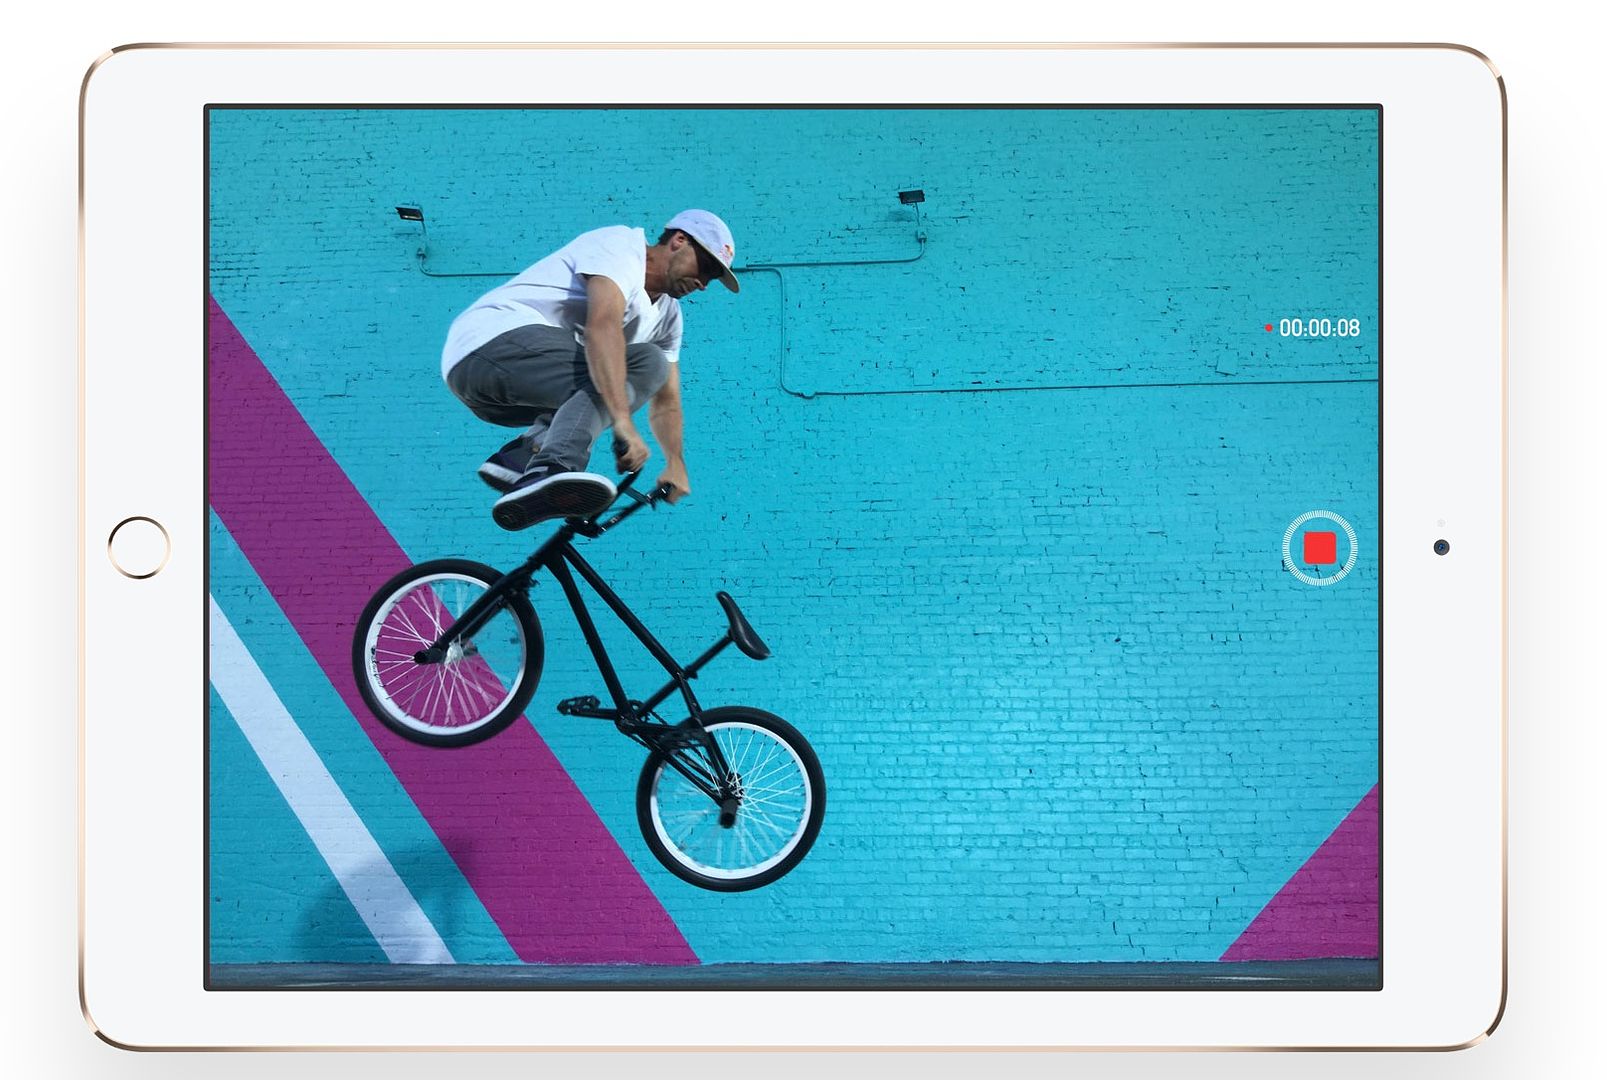 Slo-Mo video taken with iPad Air 2: Outstanding